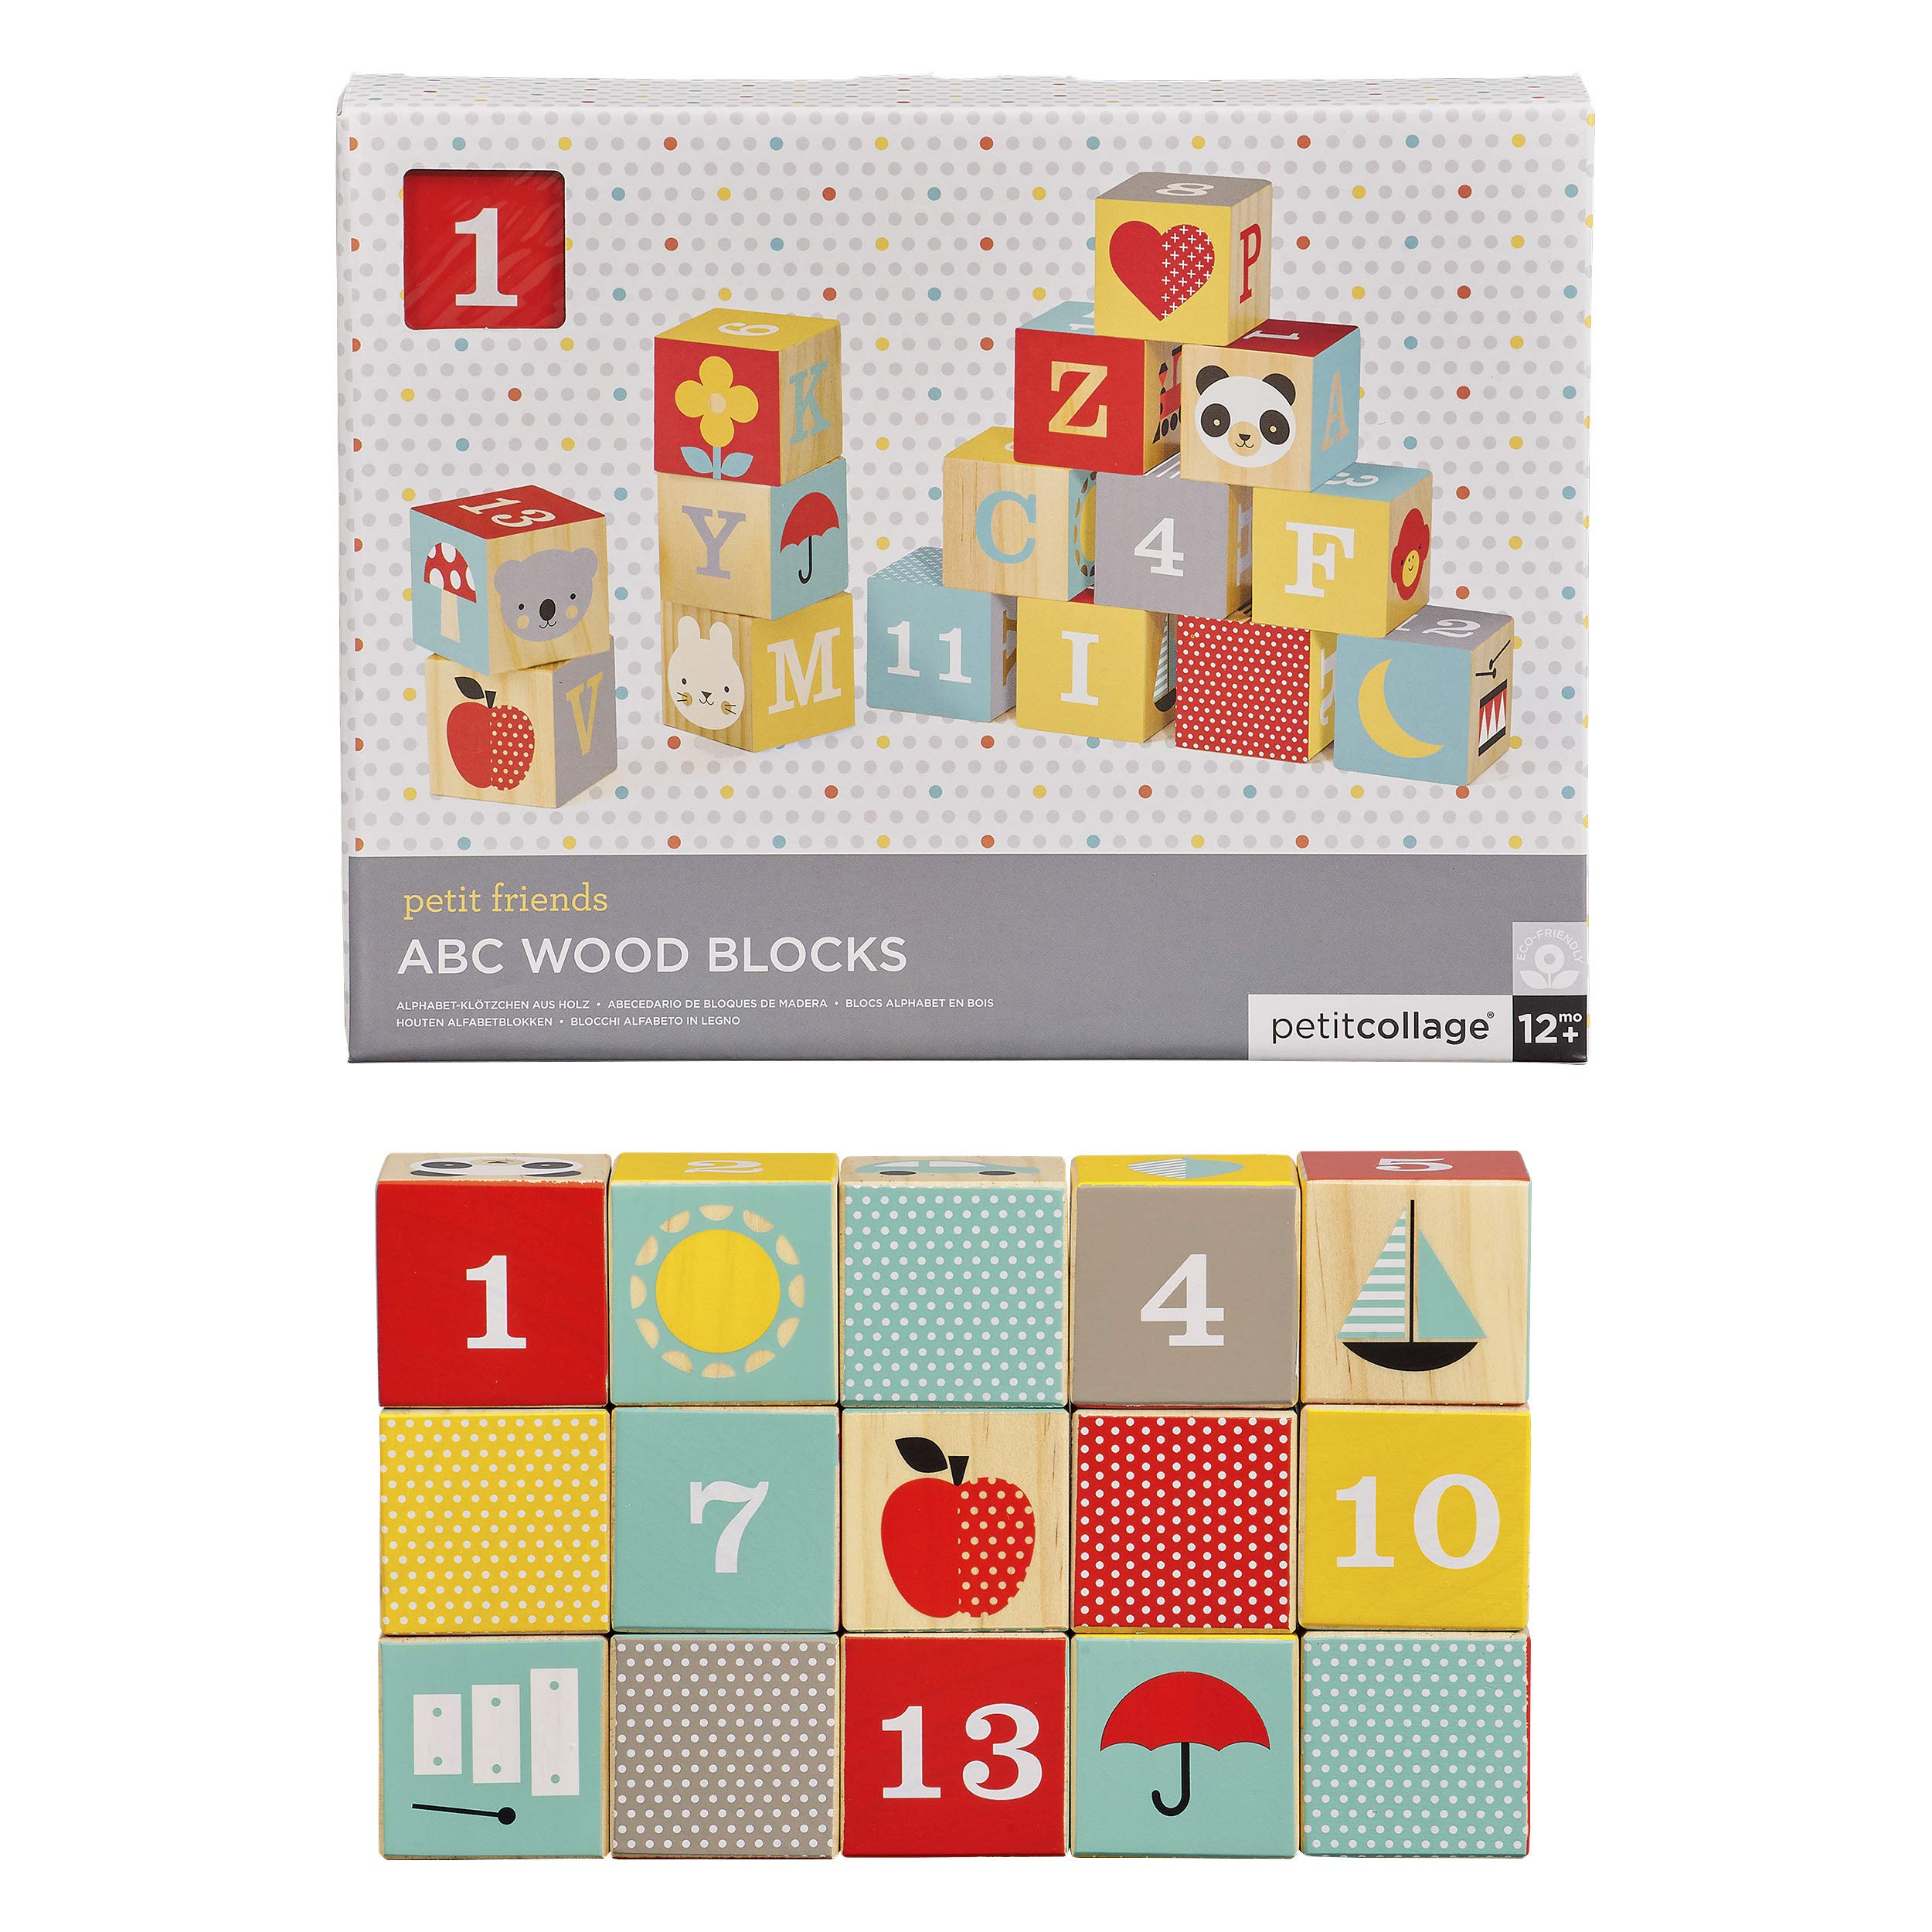 Petit Collage Eco-Friendly ABC Wooden Blocks, Set of 15 – Solid Wooden Blocks for Kids 12 Month and Older – Wooden Alphabet Blocks Measure 1.75” Each, Activity Toys Designed with Safe Materials